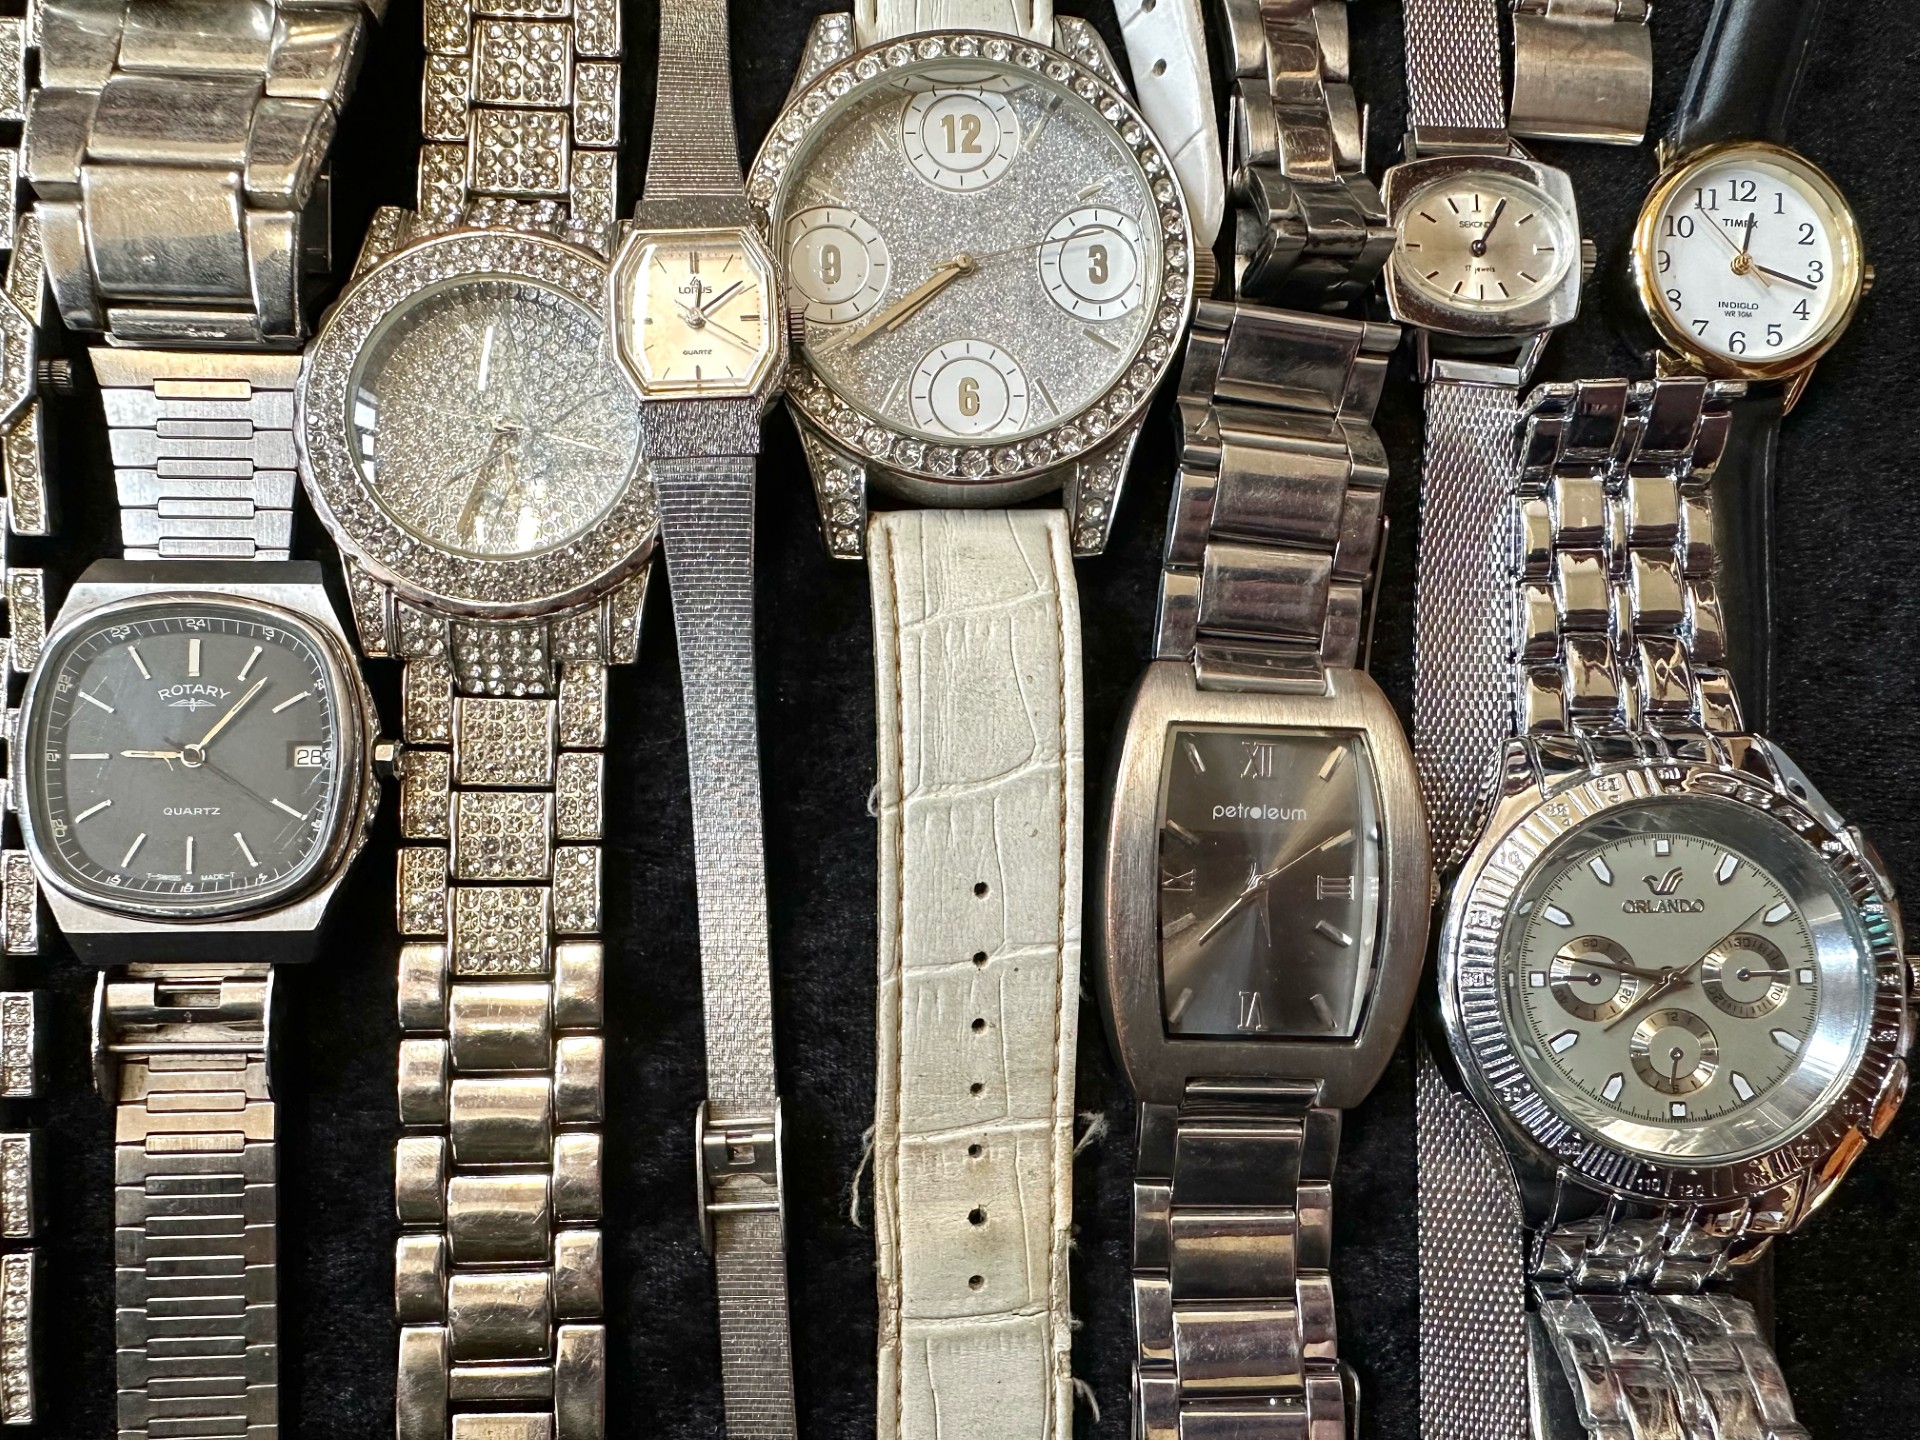 Large Collection of Wrist Watches. gents and ladies watches, lots of different makes and models. - Image 4 of 4